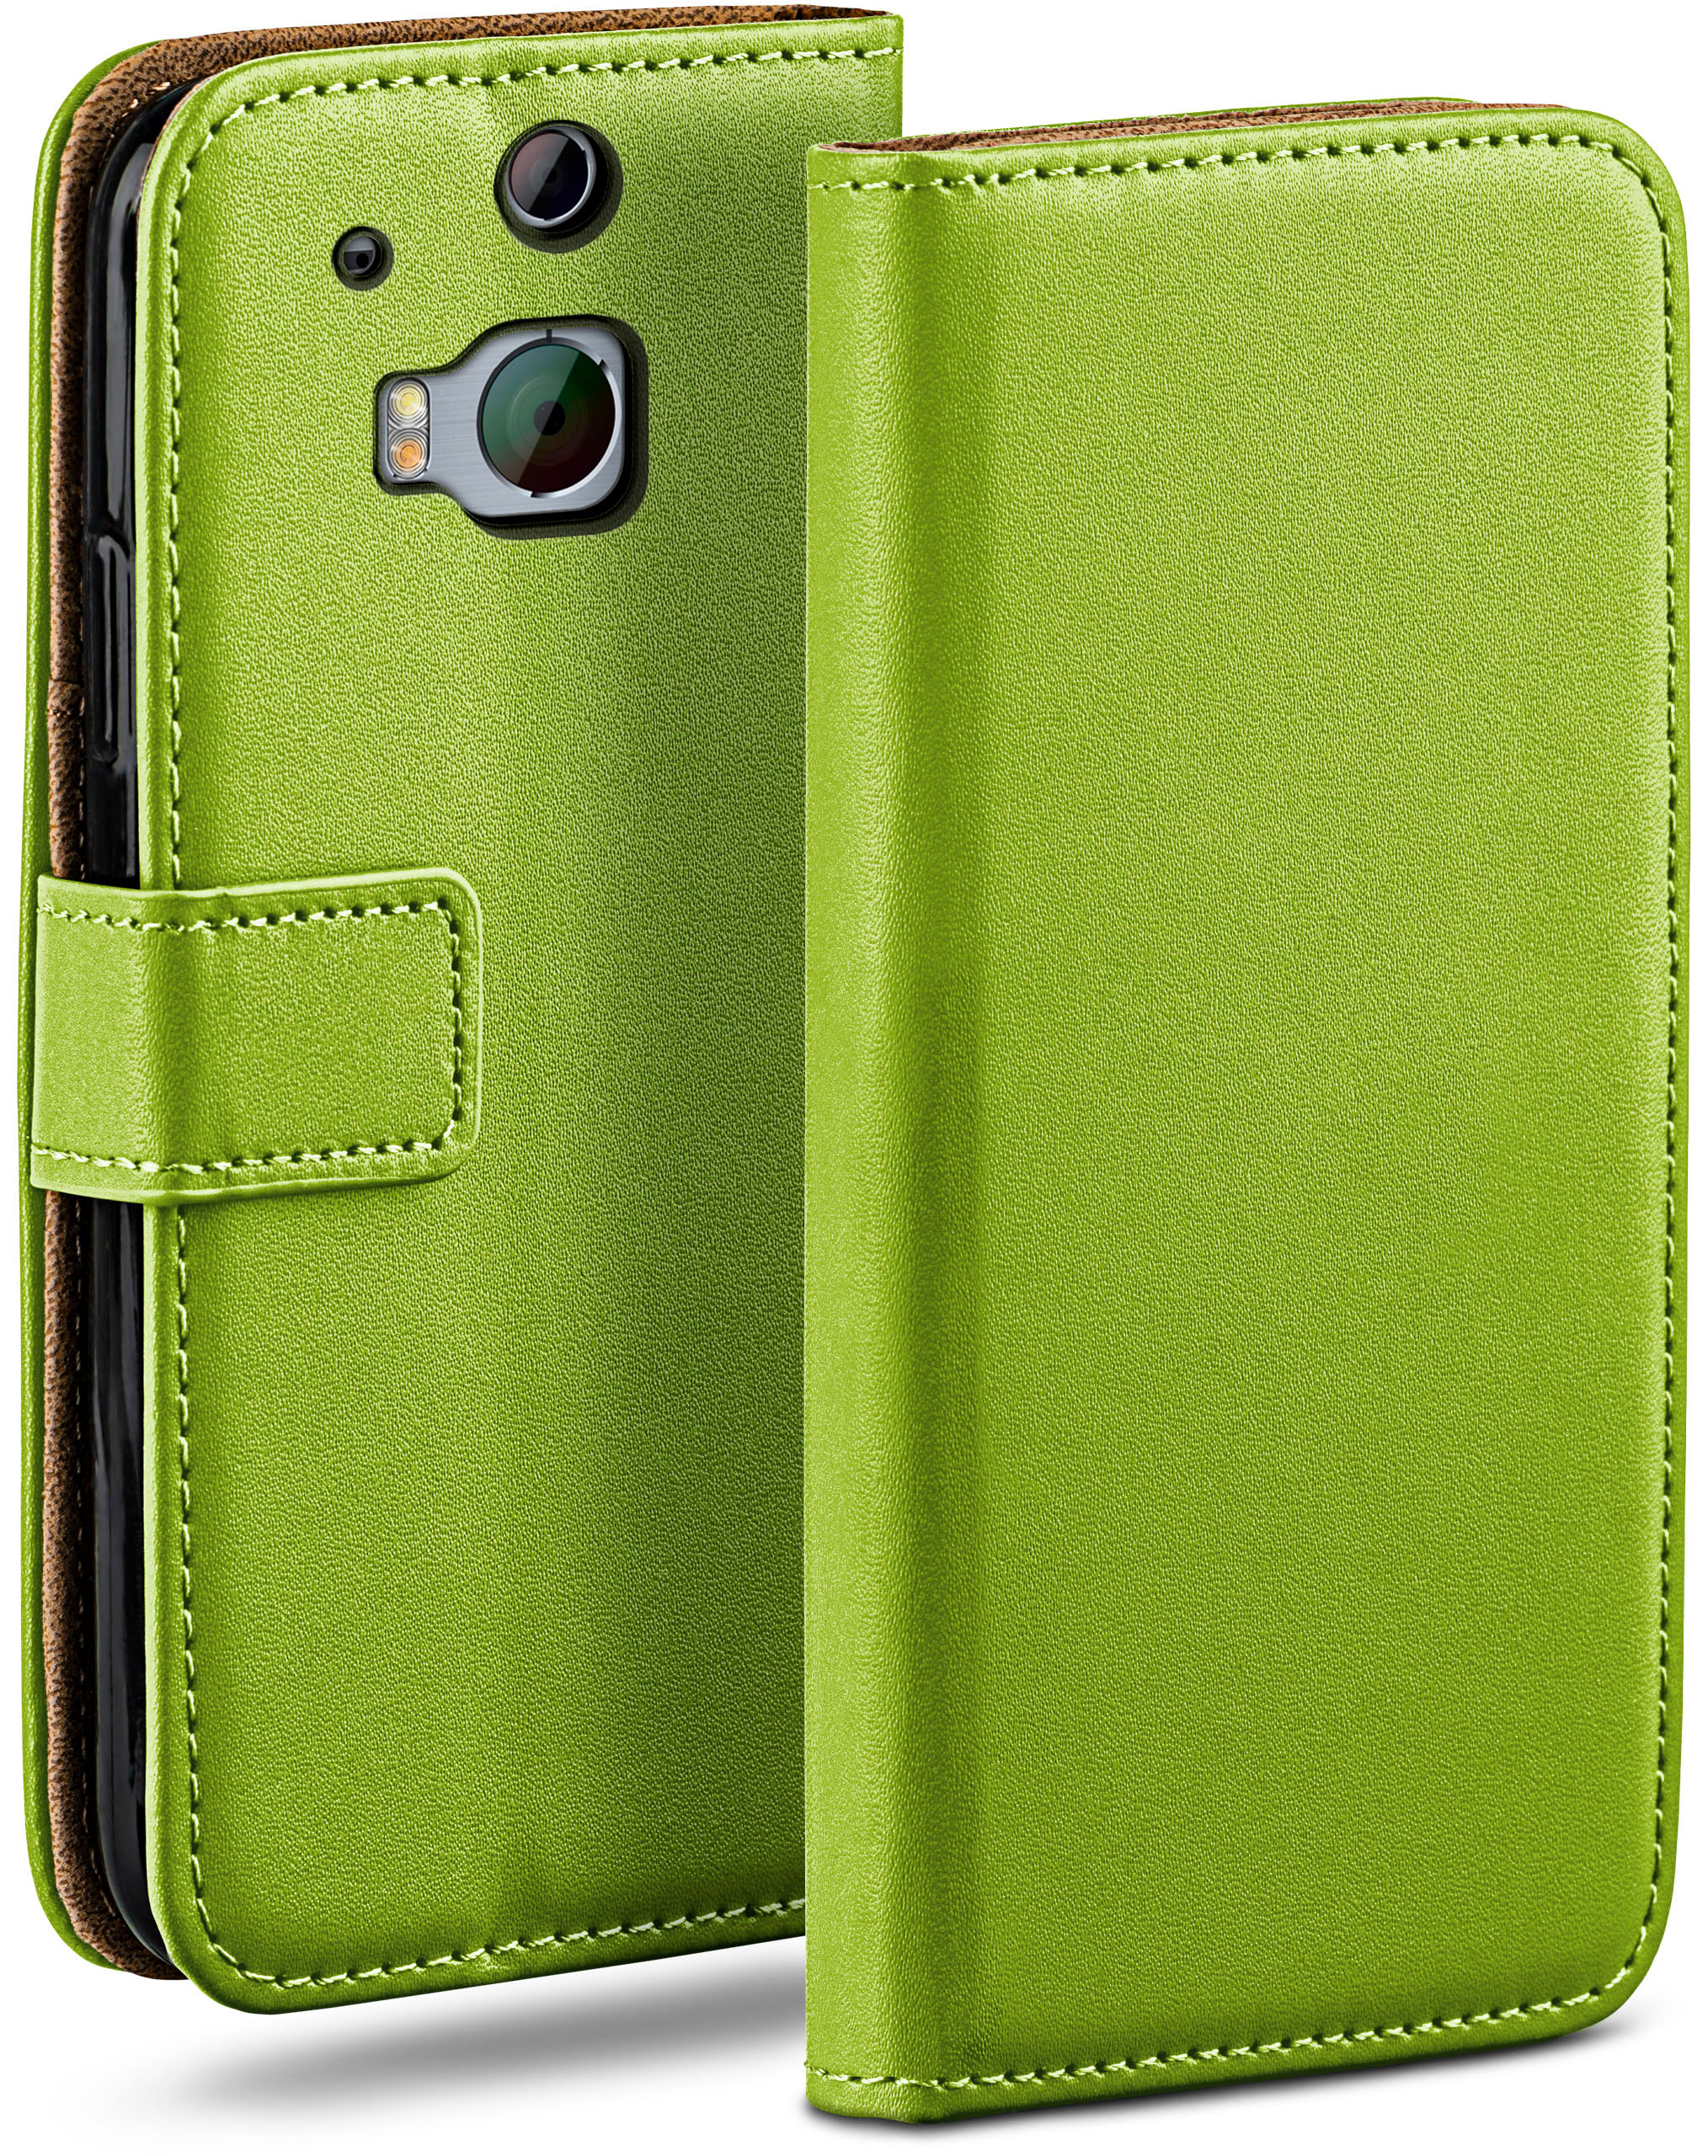 Case, MOEX Bookcover, HTC, Lime-Green M8 M8s, One Book /